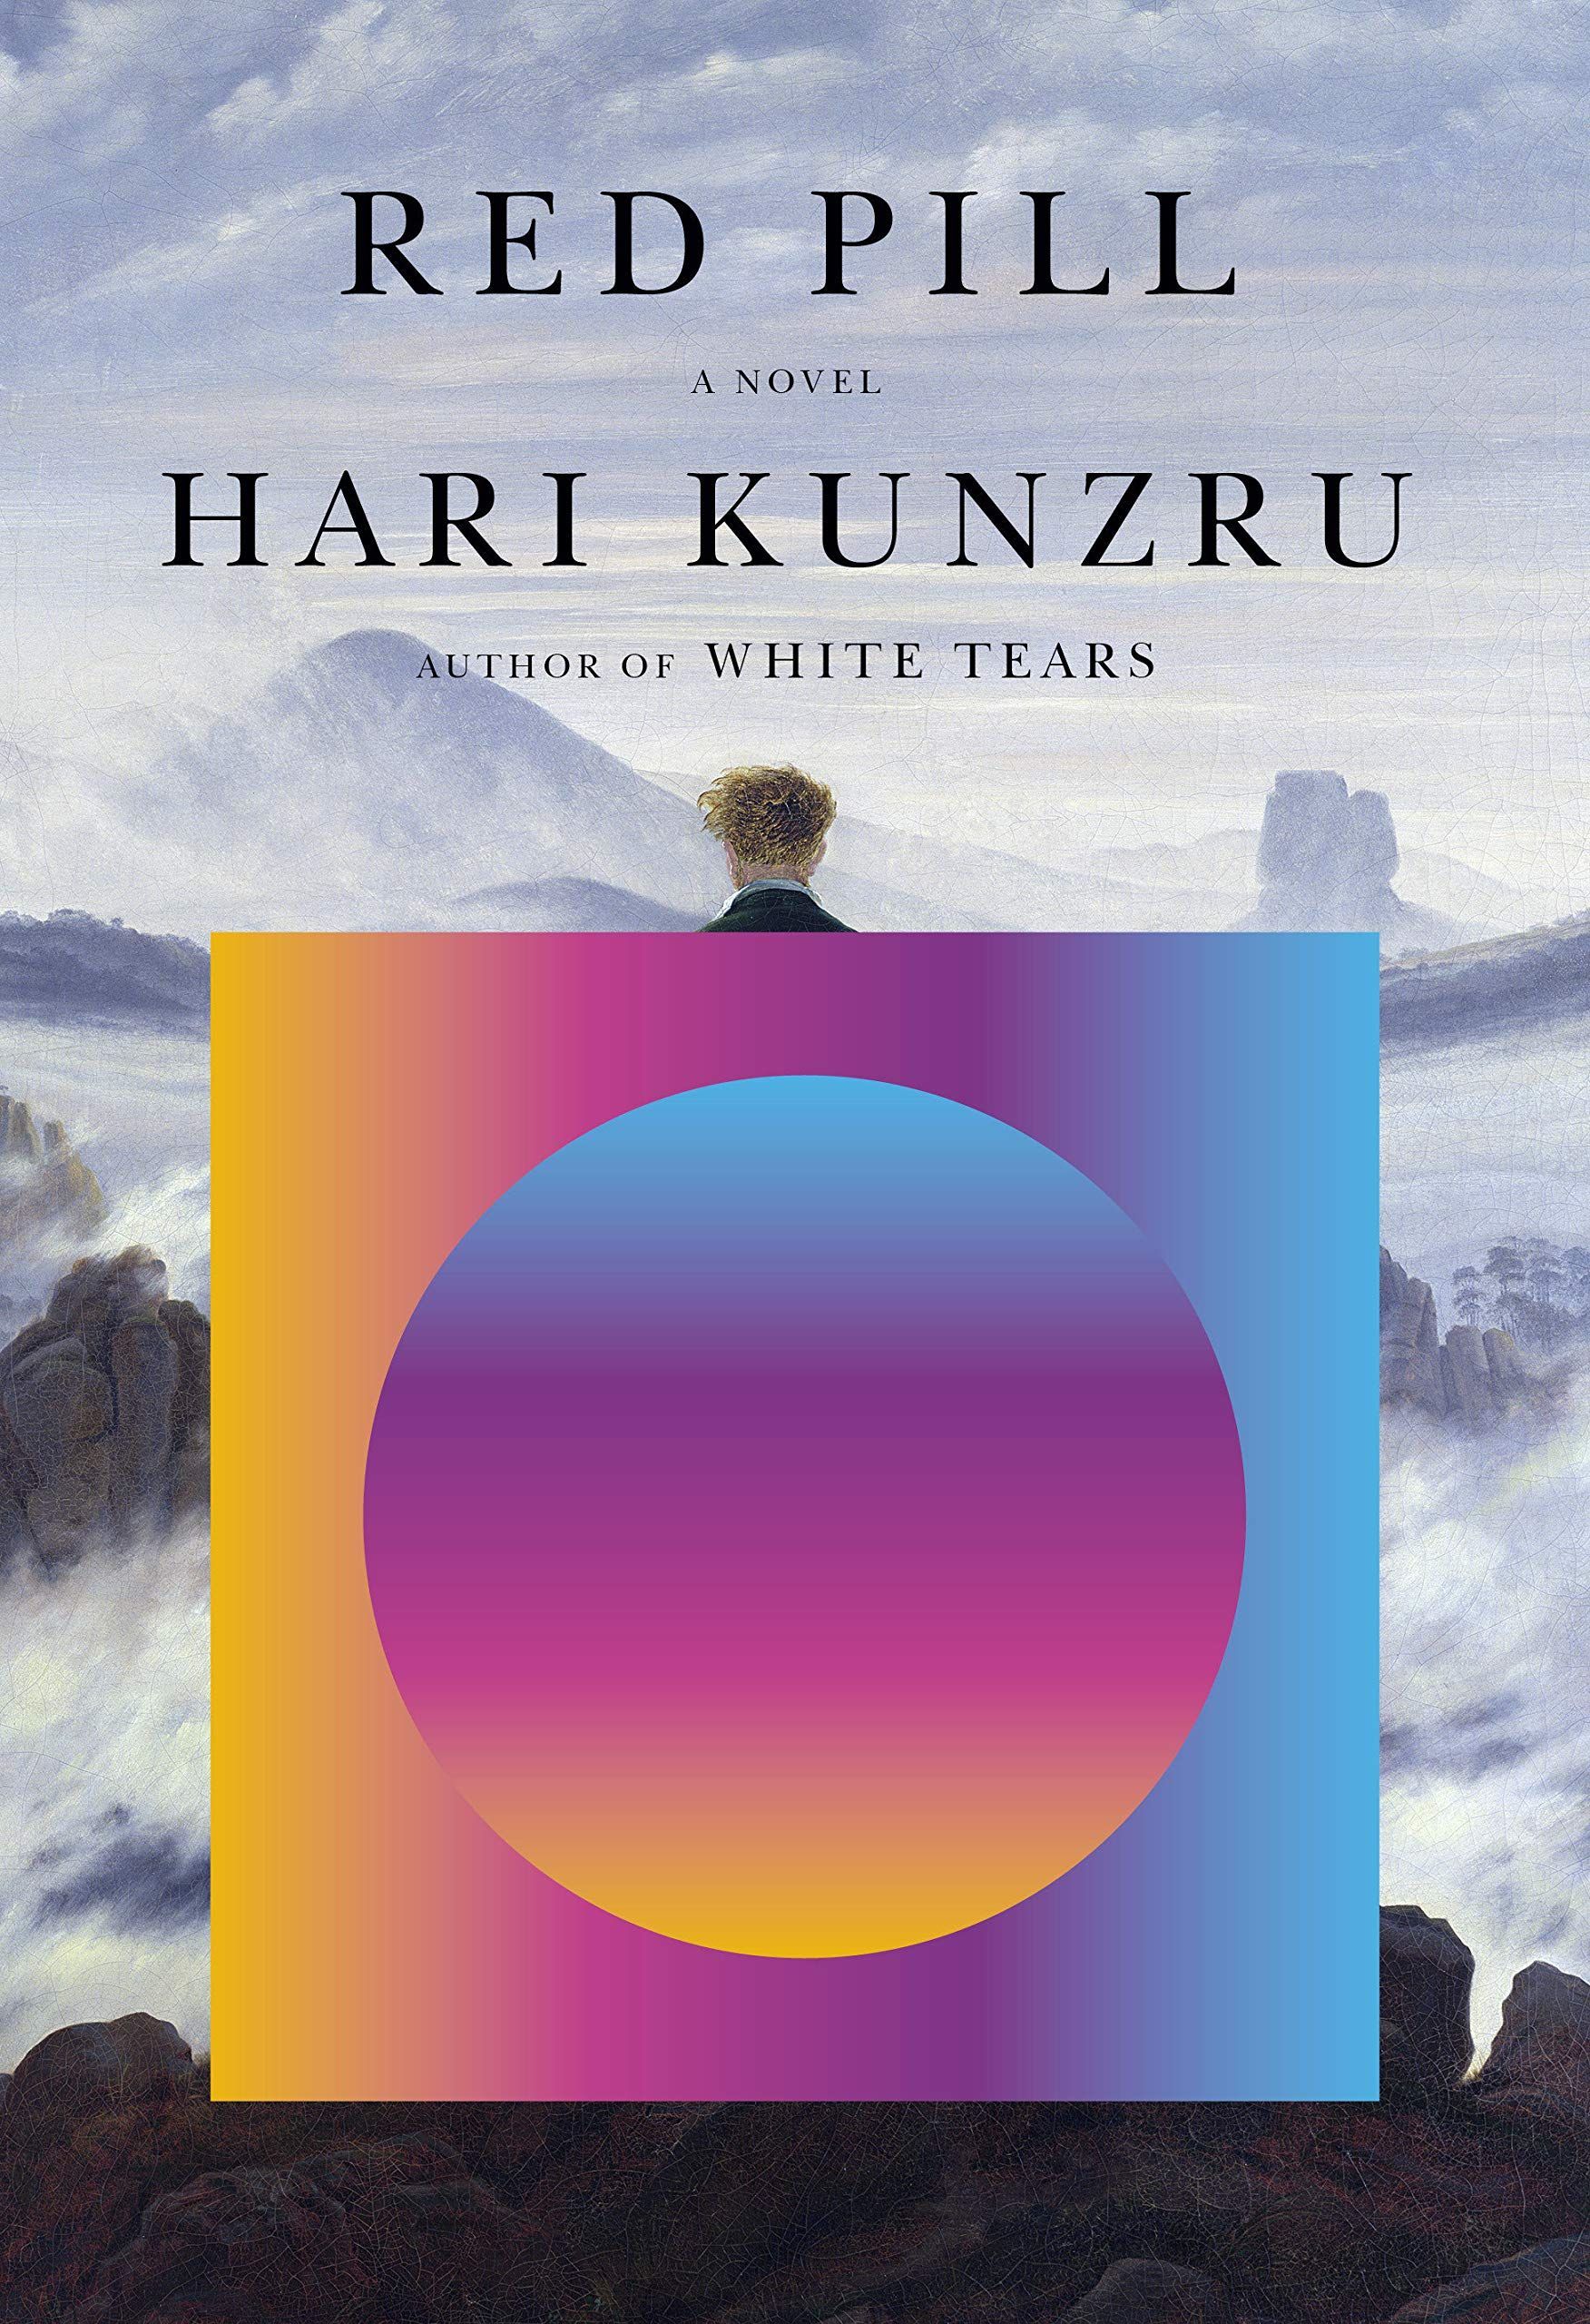 A Journey to the Idea of North: On Hari Kunzru’s “Red Pill”